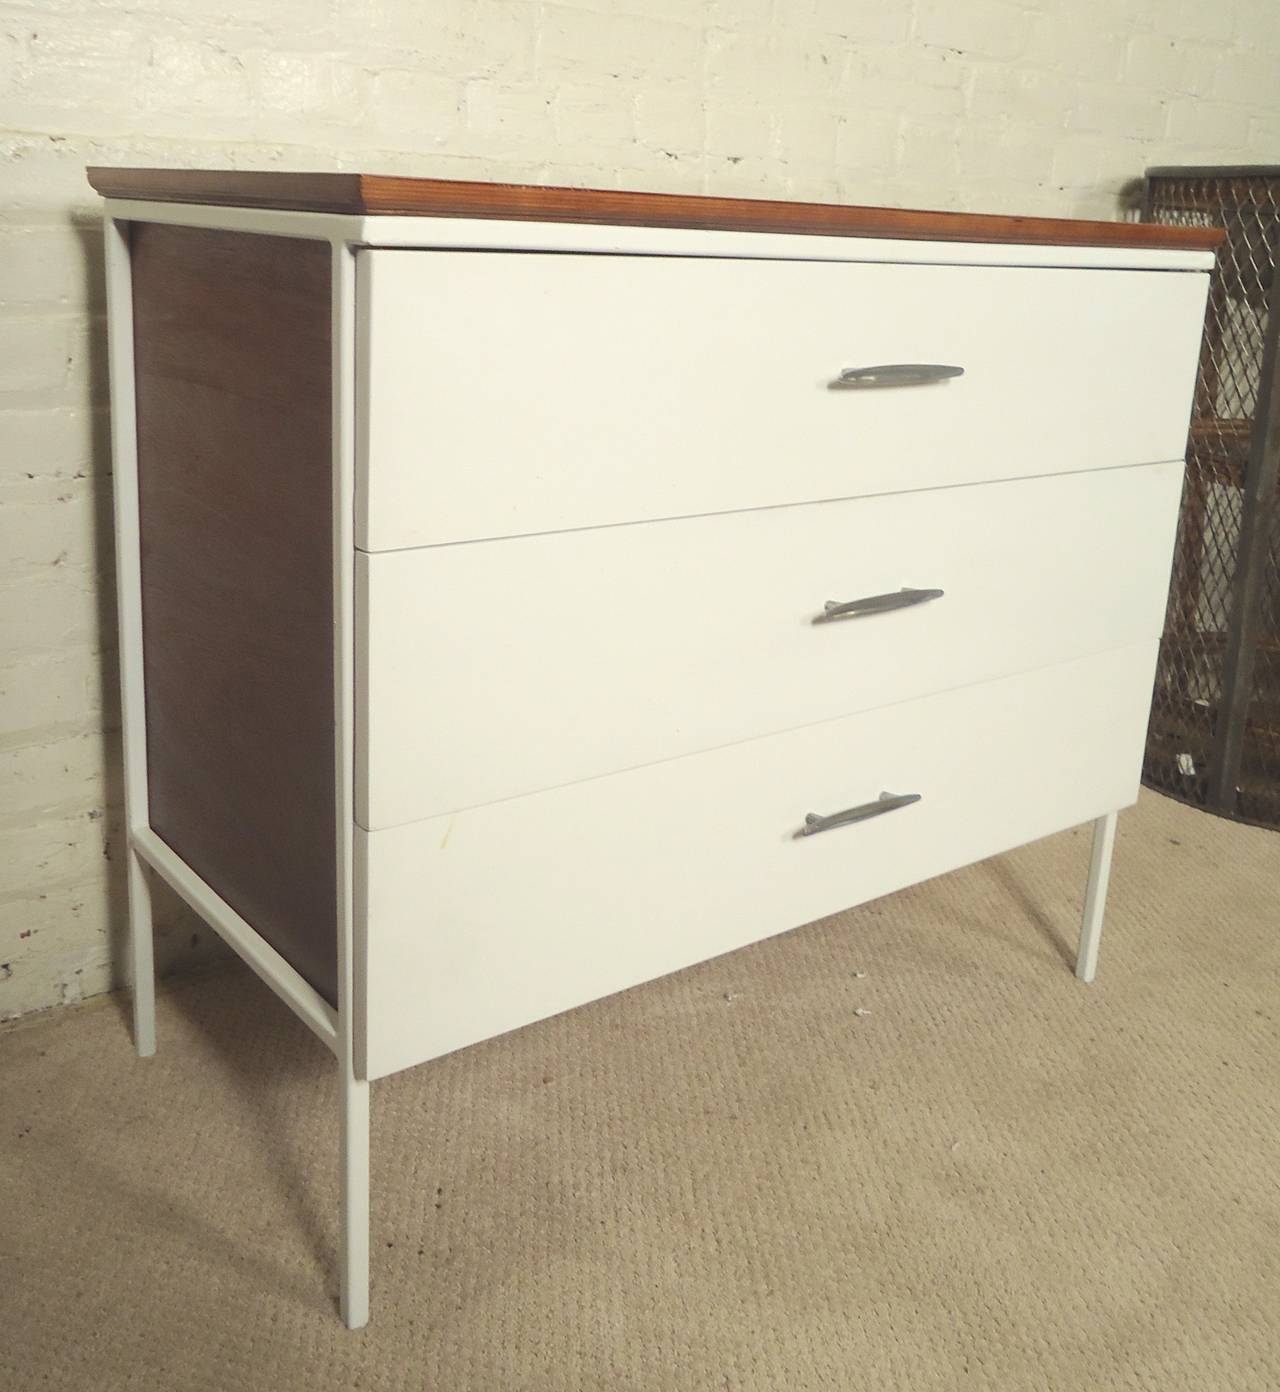 D.R. Bates & Jackson Gregory Jr. designed dresser with white front and matching iron frame. Accenting wood top and sides, original curved handles.

(Please confirm item location - NY or NJ - with dealer)